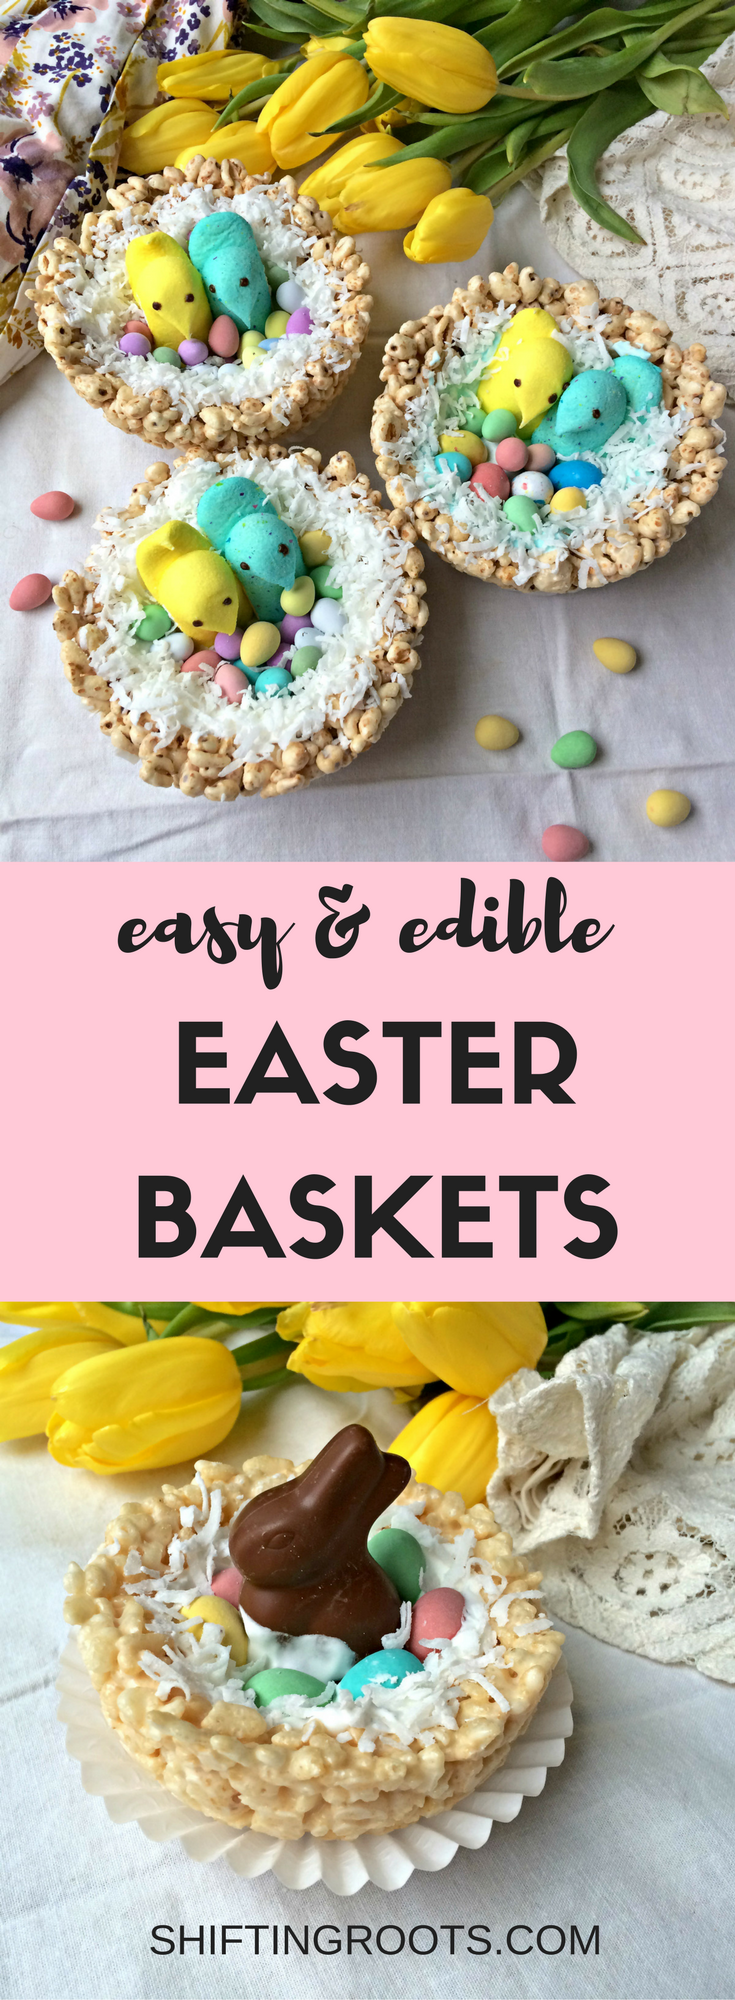 Check out this creative DIY Easter basket tutorial--everything is completely edible!  Make the nest from Rice Krispies or puffed wheat, then decorate with jelly beans, candy, coconut, chocolate, and peeps.  A fun recipe you can do with your kids. #easter #easterbasket #ricekrispietreats #ricekrispies #easter #easterideas #easterbasketideas #peeps #easternests 